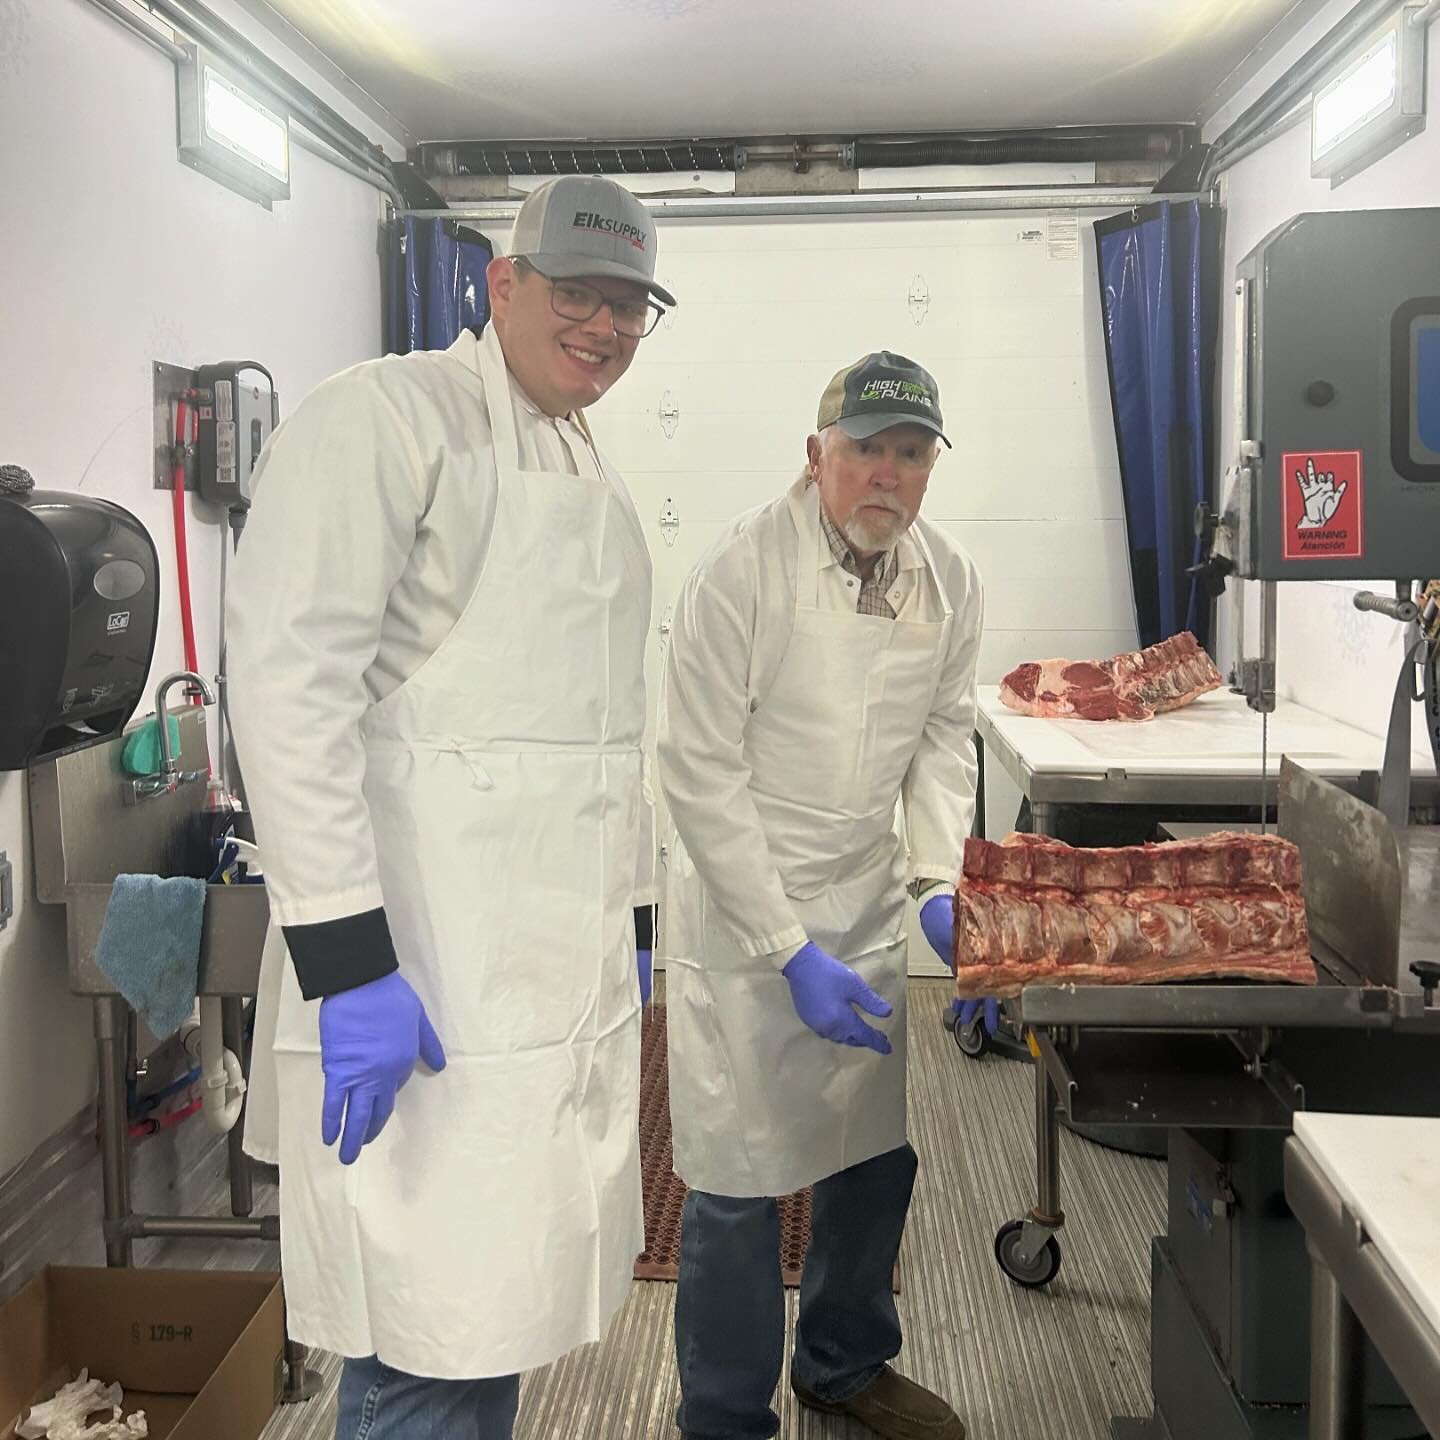 The Meat Processing class is up and running! Bob and Jacob are getting it done!